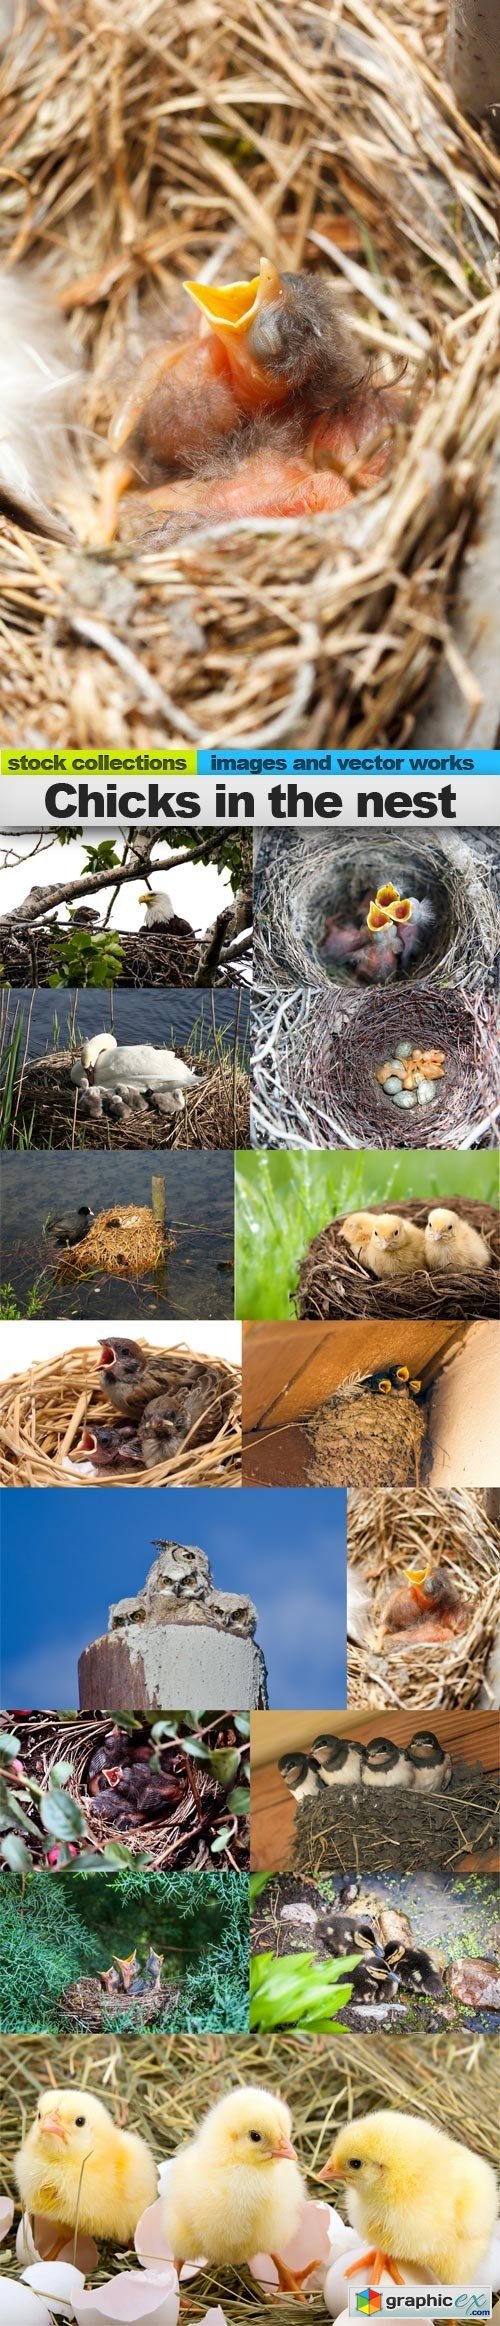 Chicks in the nest, 15 x UHQ JPEG